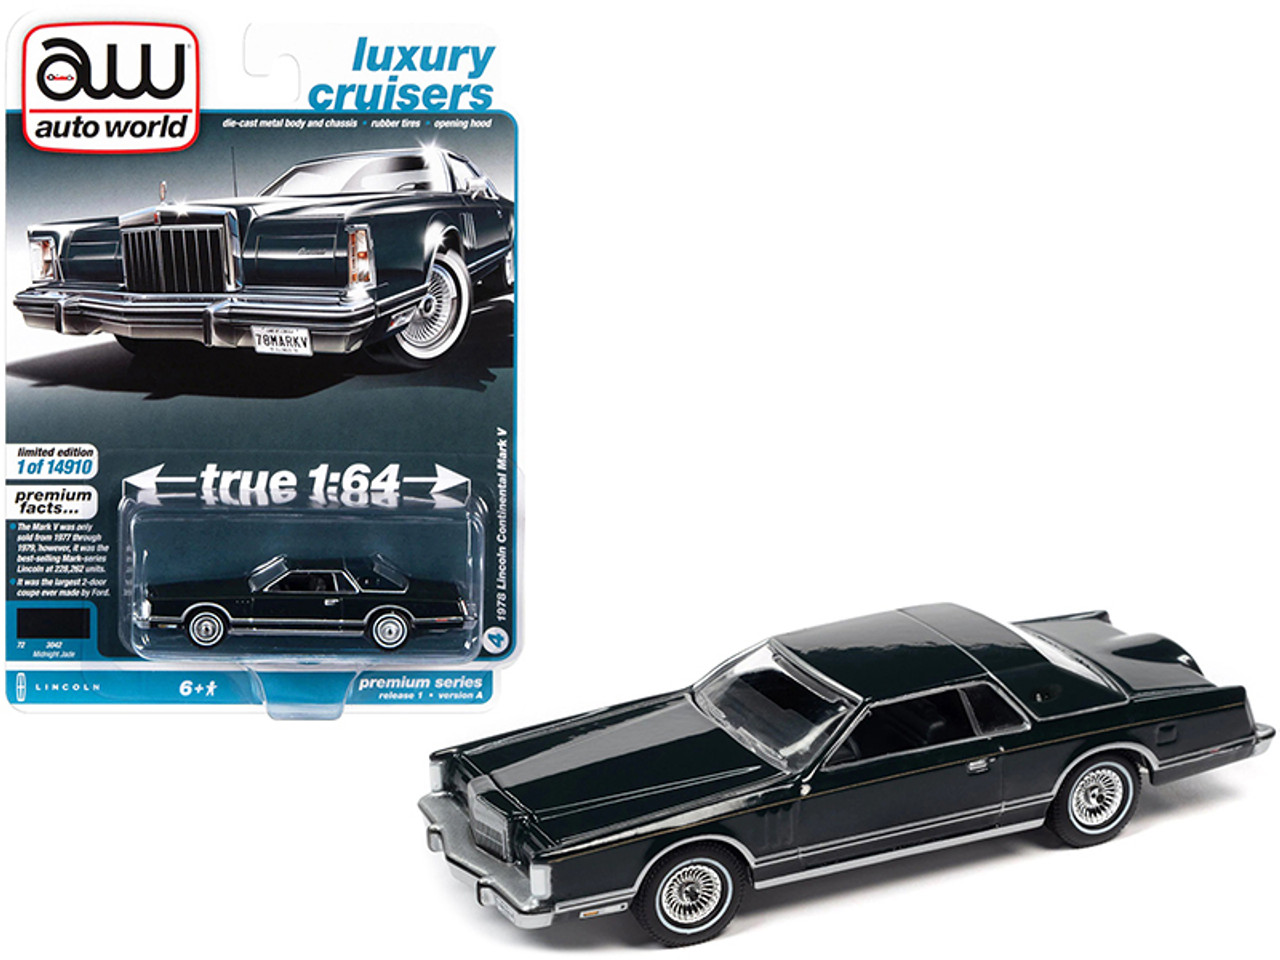 1978 Lincoln Continental Mark V Midnight Jade Green with Rear Section of Roof Matt Green "Luxury Cruisers" Limited Edition to 14910 pieces Worldwide 1/64 Diecast Model Car by Auto World